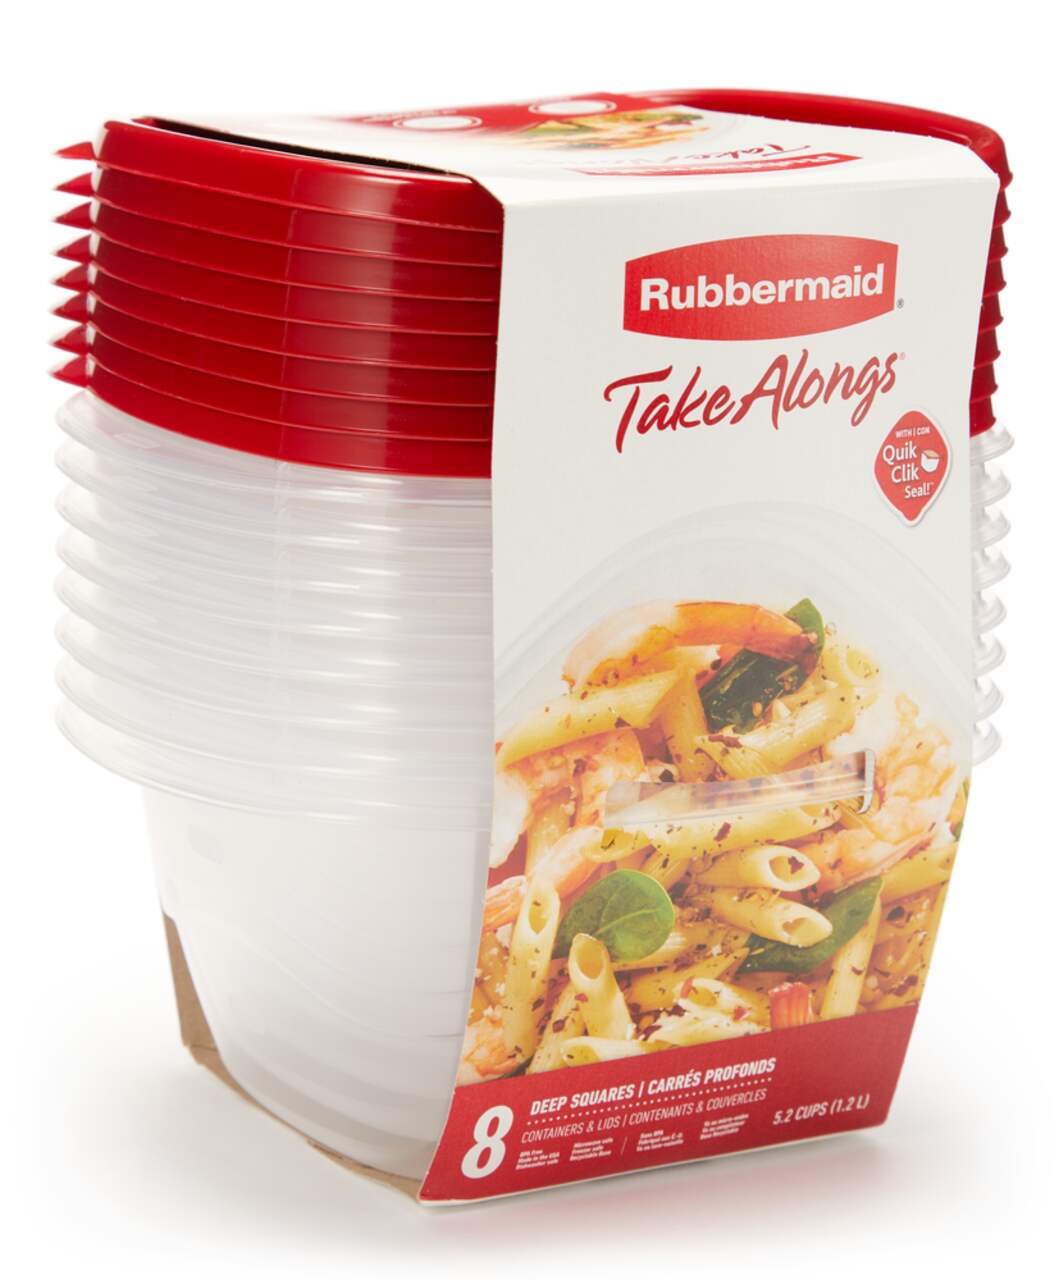  Rubbermaid TakeAlongs Deep Square Food Storage Containers, 5.2  cups, 8 pack (4 lids + 4 containers): Home & Kitchen